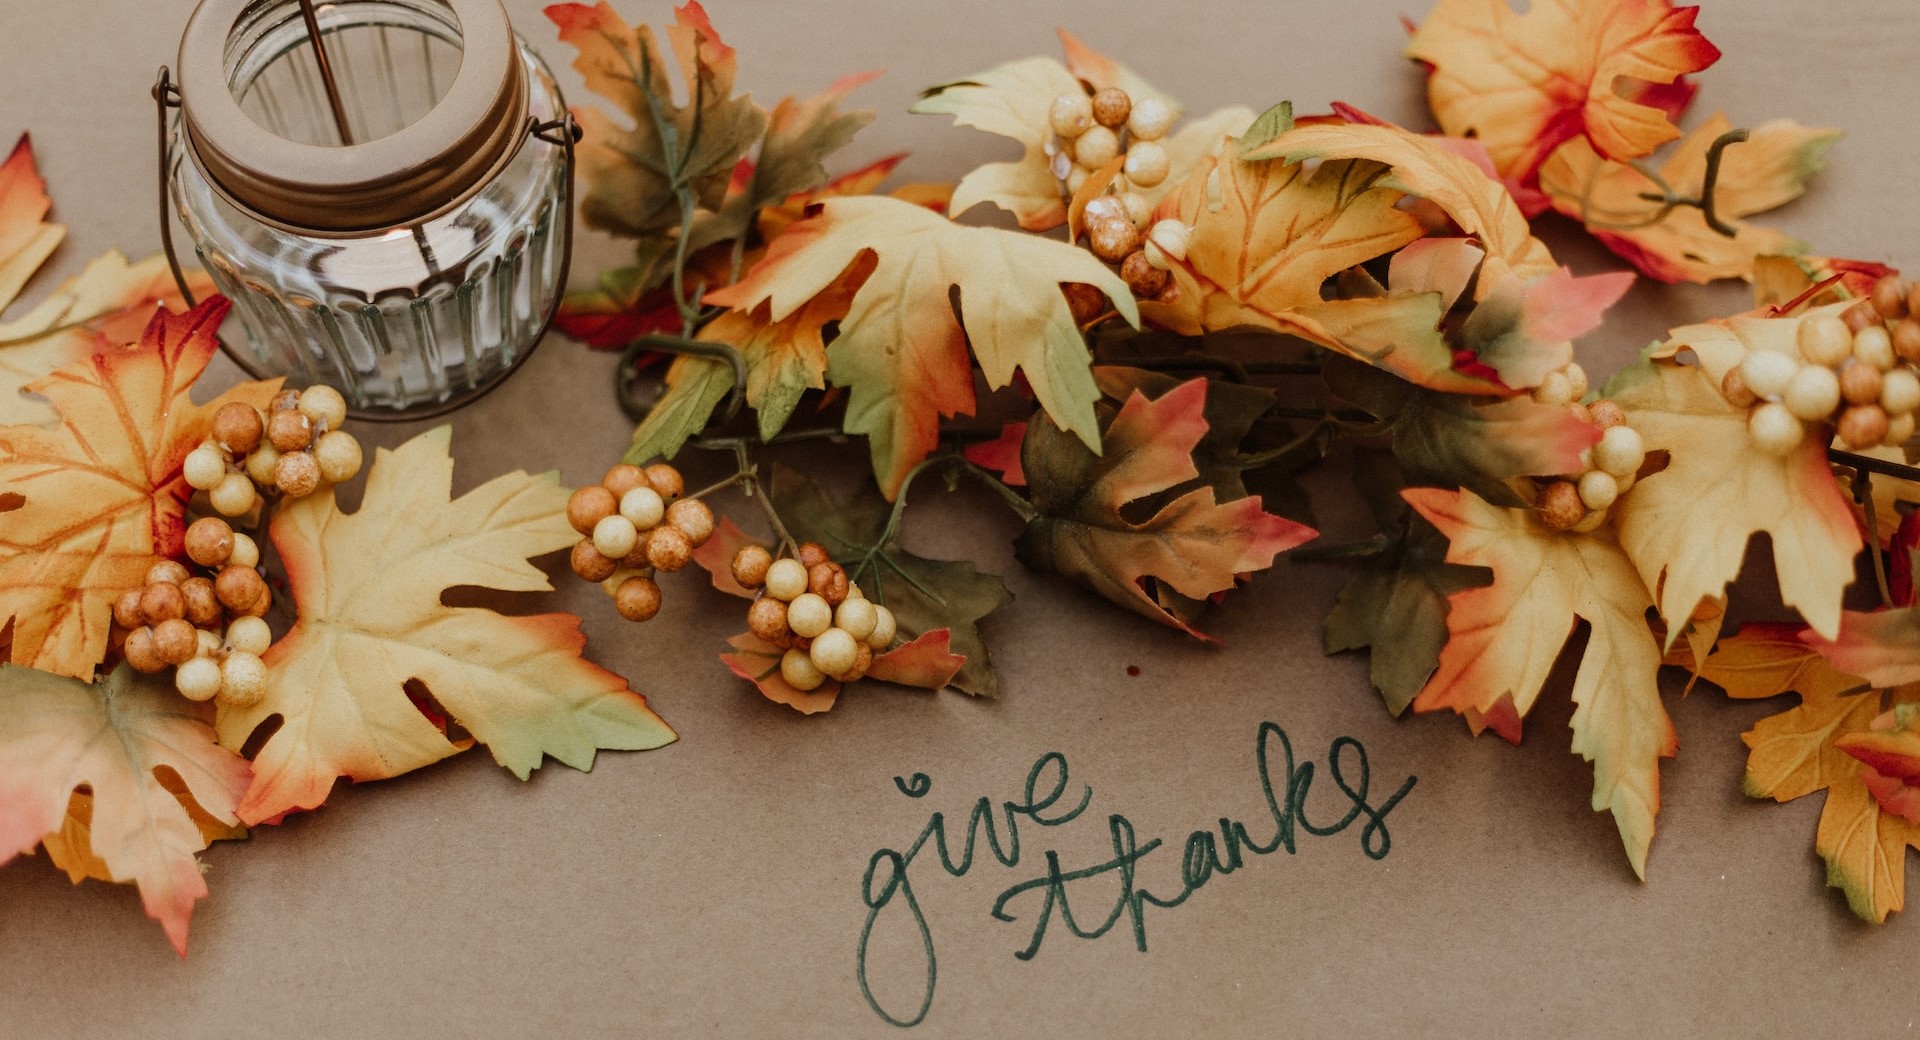 Thankfulness for significance, intimacy, and … disappointment